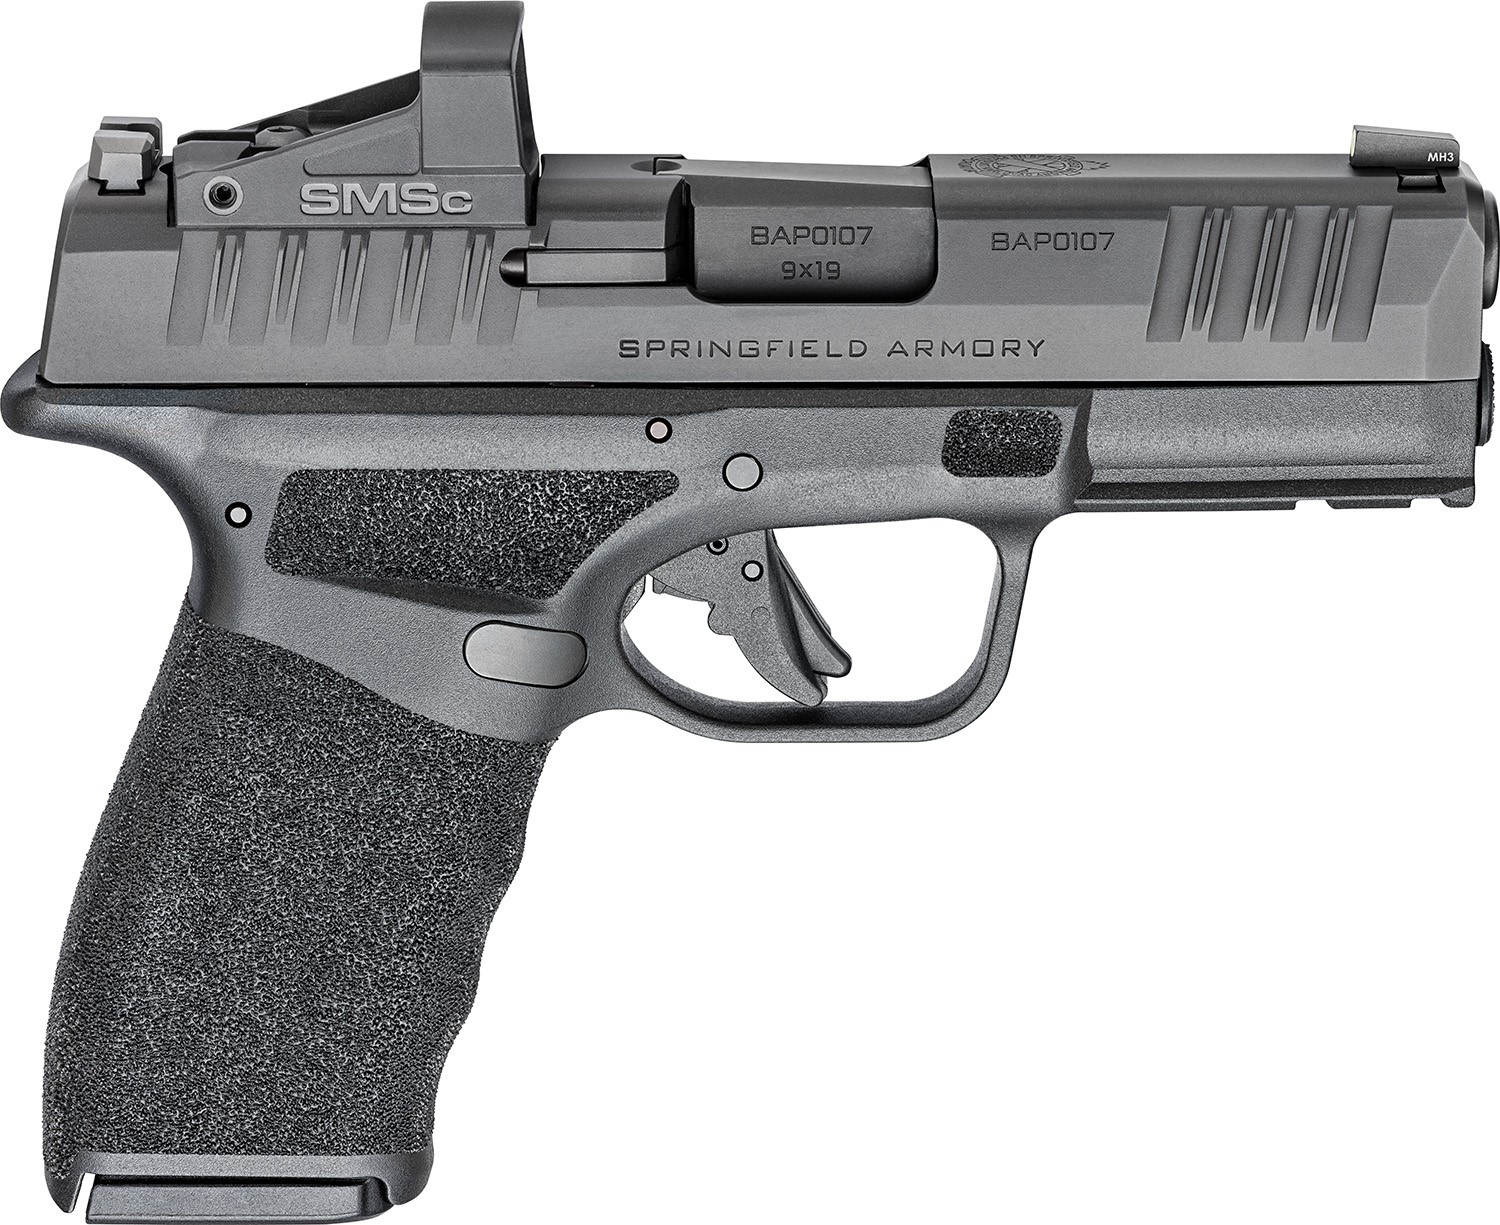 SPRINGFIELD ARMORY HELLCAT PRO, 9MM 3.7", SHIELD RED DOT, TRITIUM FRT SITE, 2-15RD MAGS